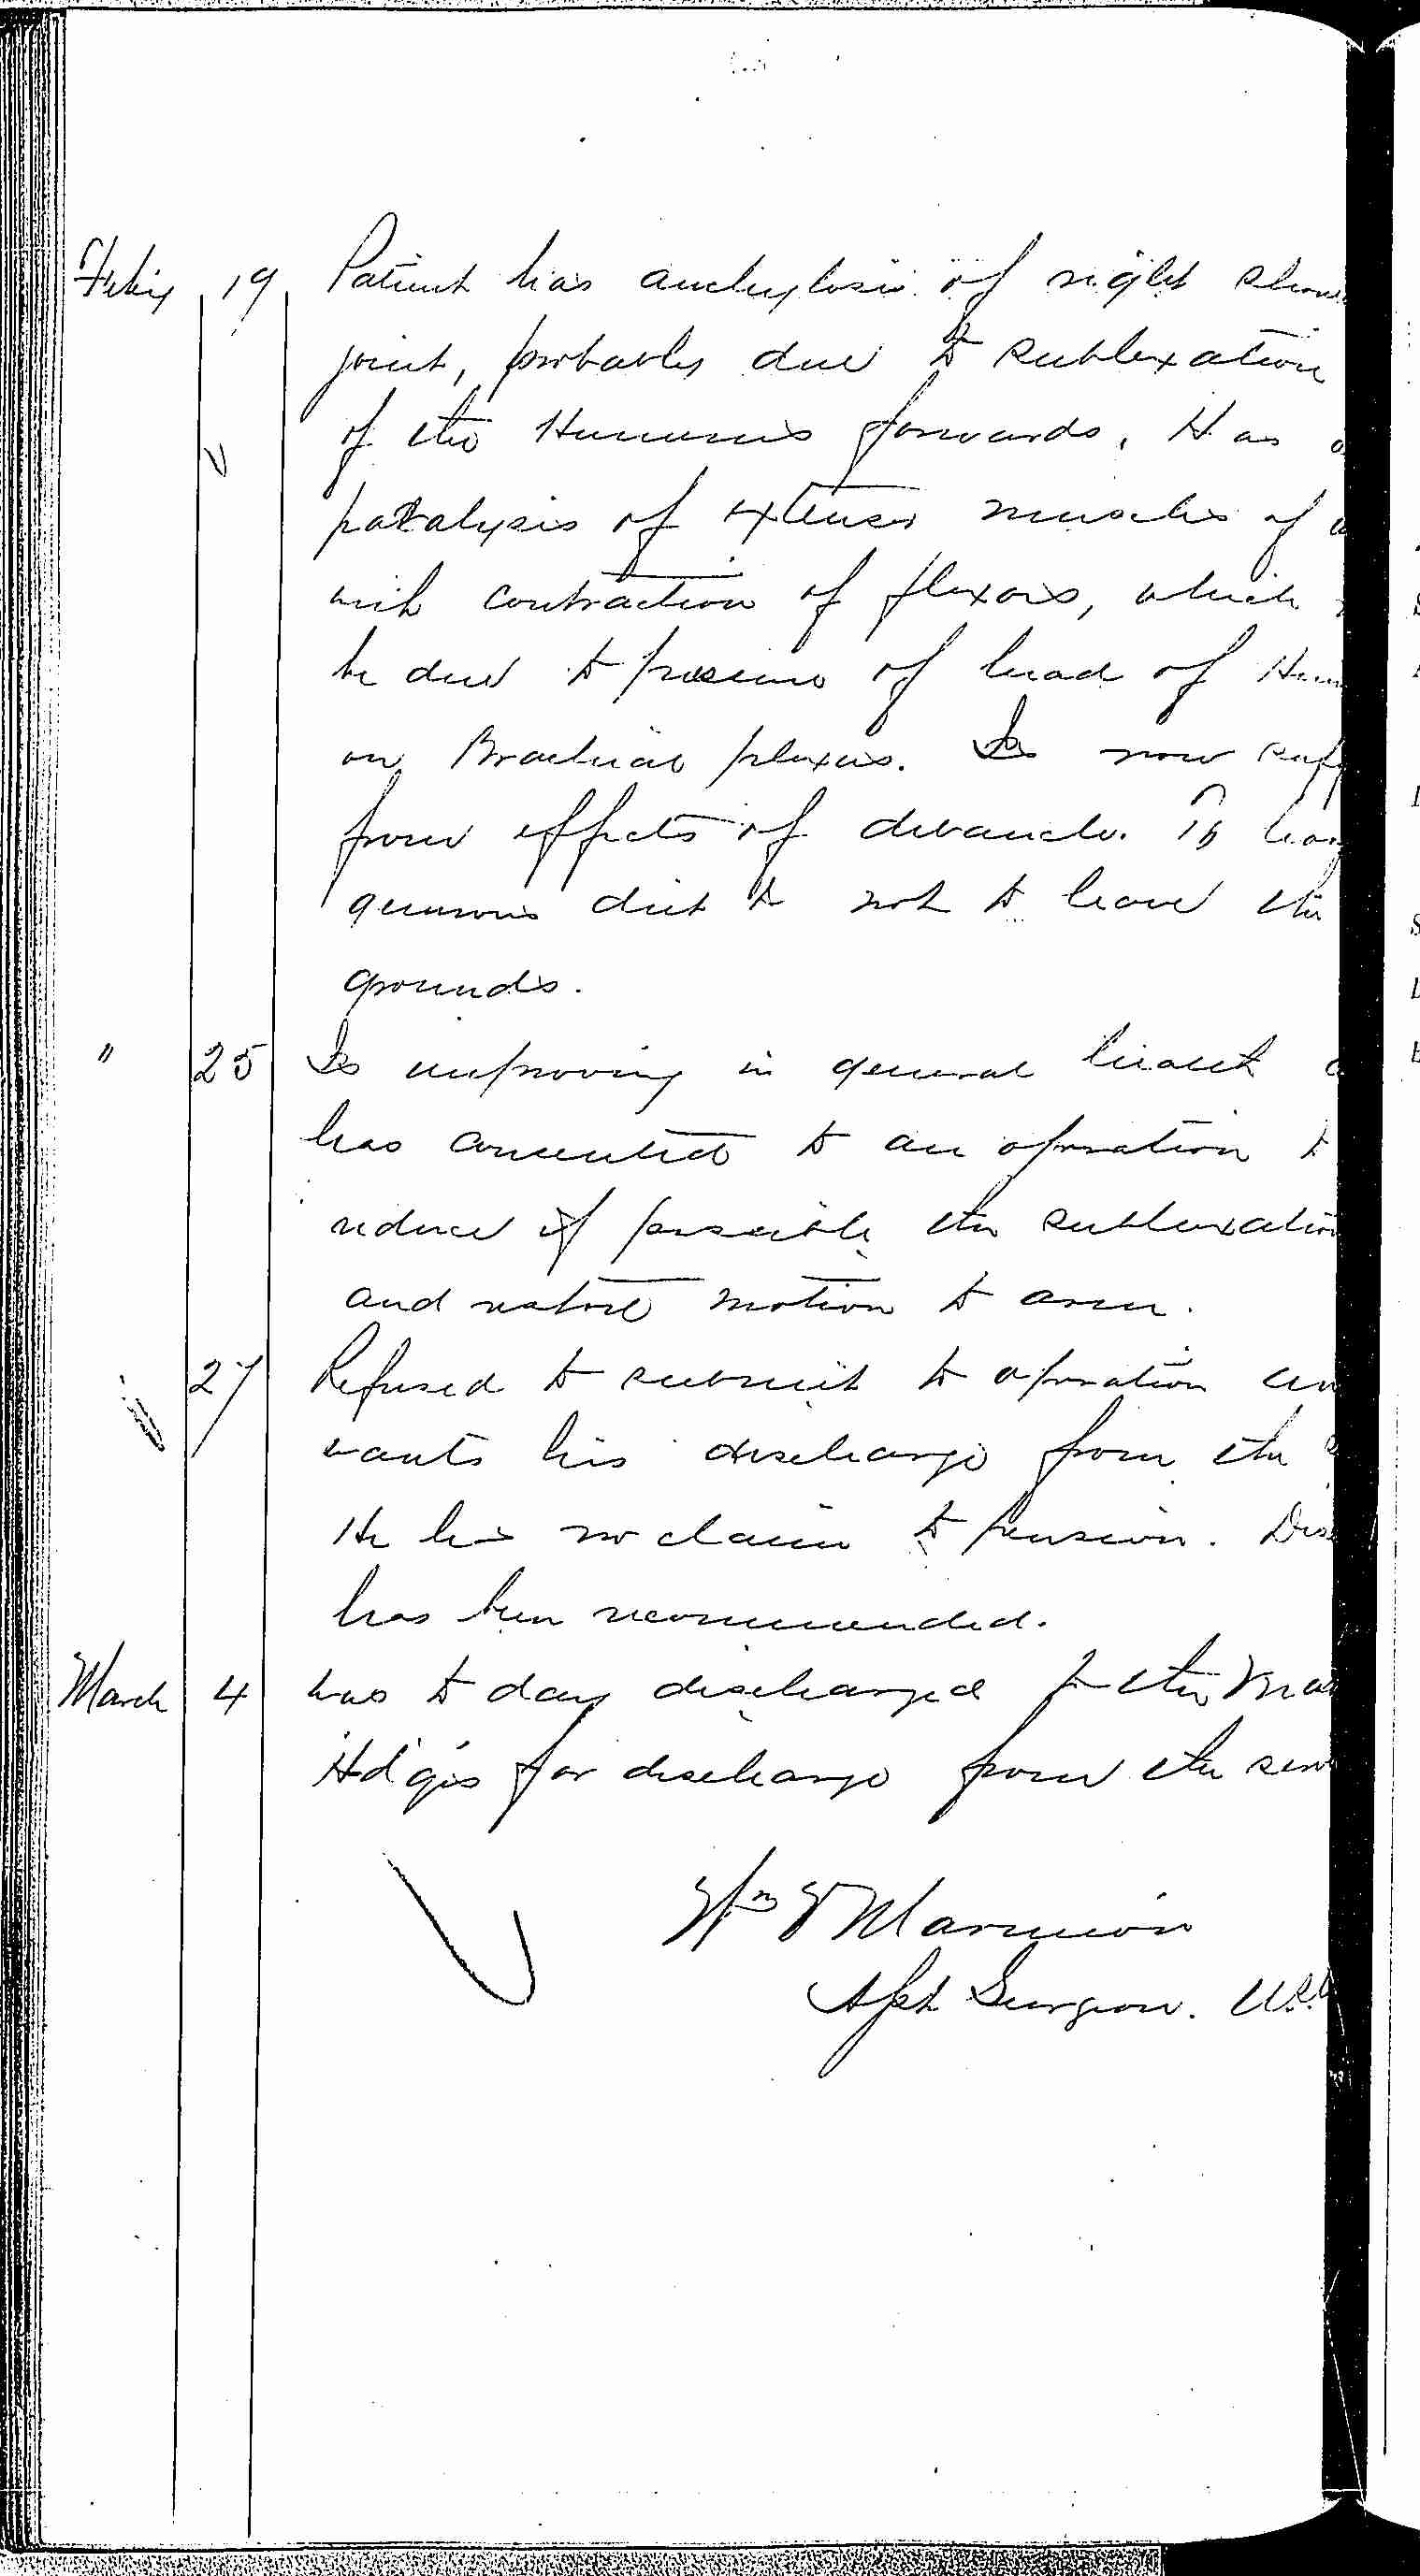 Entry for Michael Craemer (page 2 of 2) in the log Hospital Tickets and Case Papers - Naval Hospital - Washington, D.C. - 1868-69